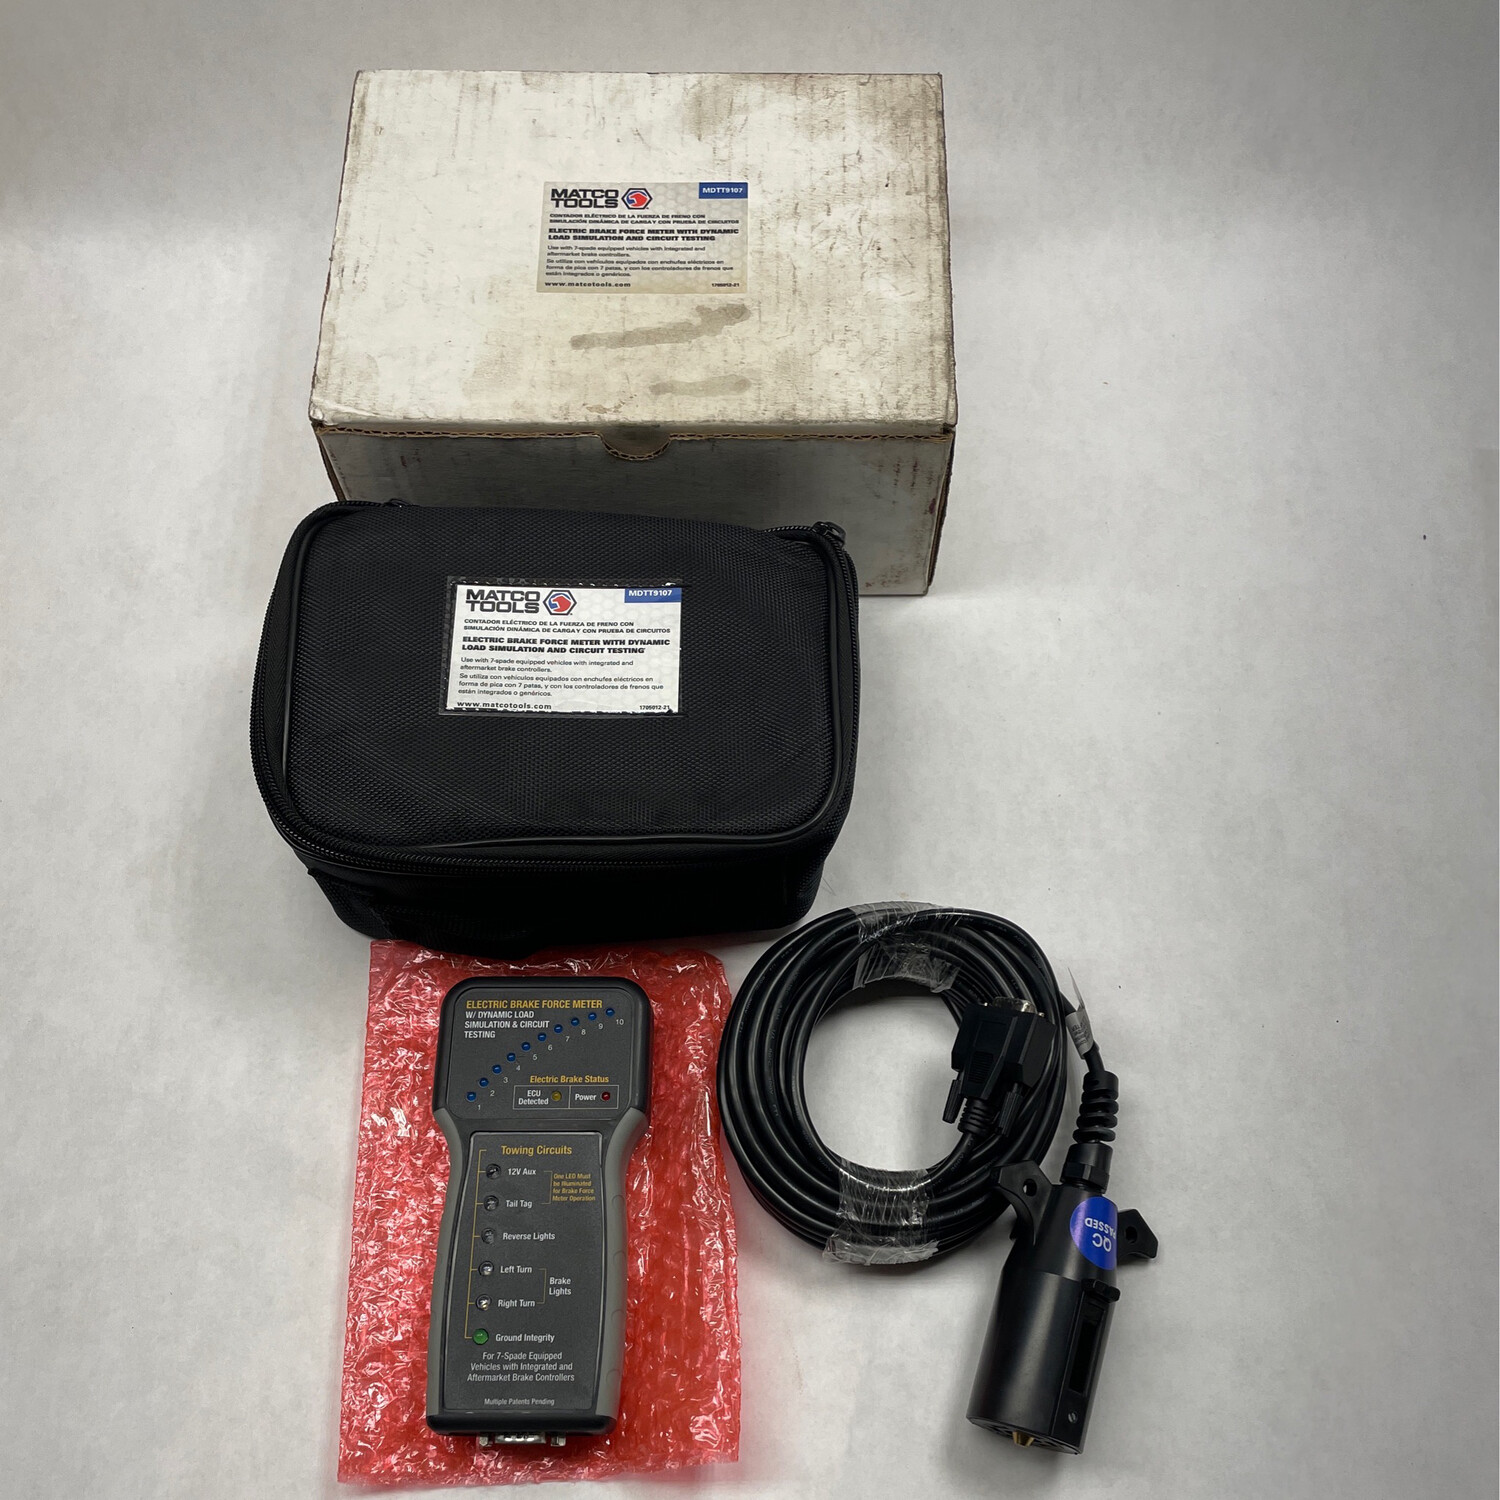 NEW Matco Electric Brake Force Meter w/Dynamic Load Simulation and Circuit Testing, MDTT9107